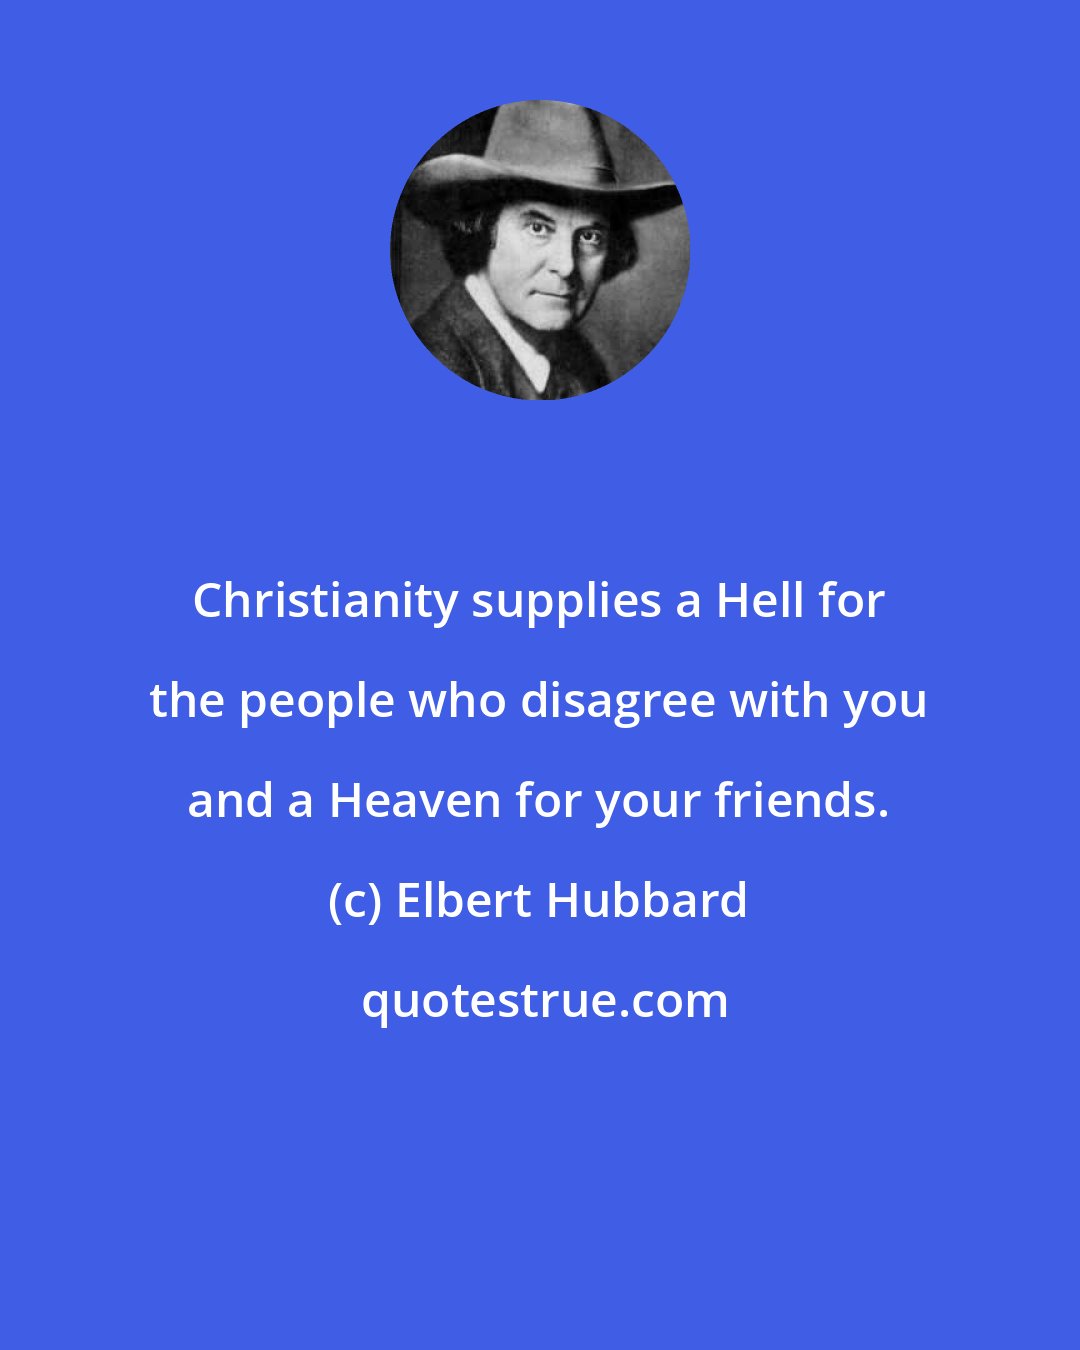 Elbert Hubbard: Christianity supplies a Hell for the people who disagree with you and a Heaven for your friends.